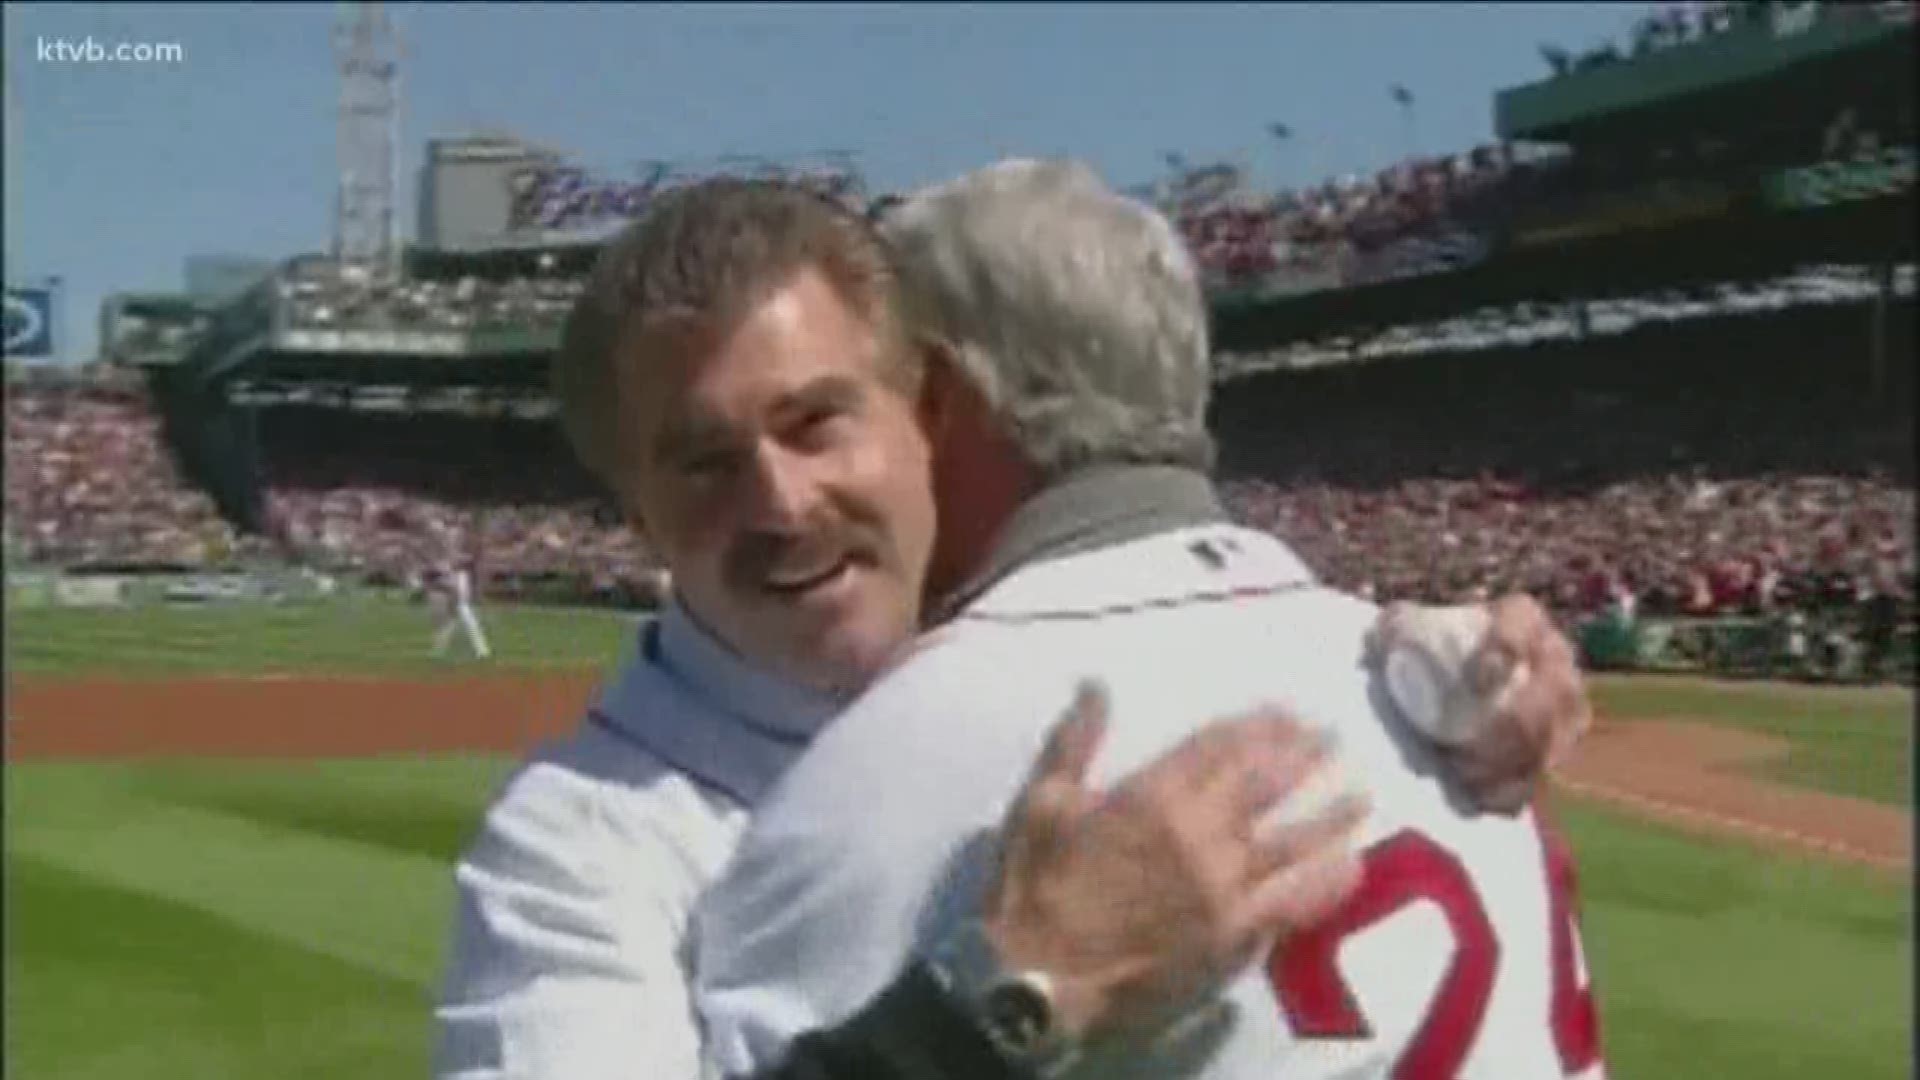 Late Red Sox legend Bill Buckner previously played for Spokane Indians